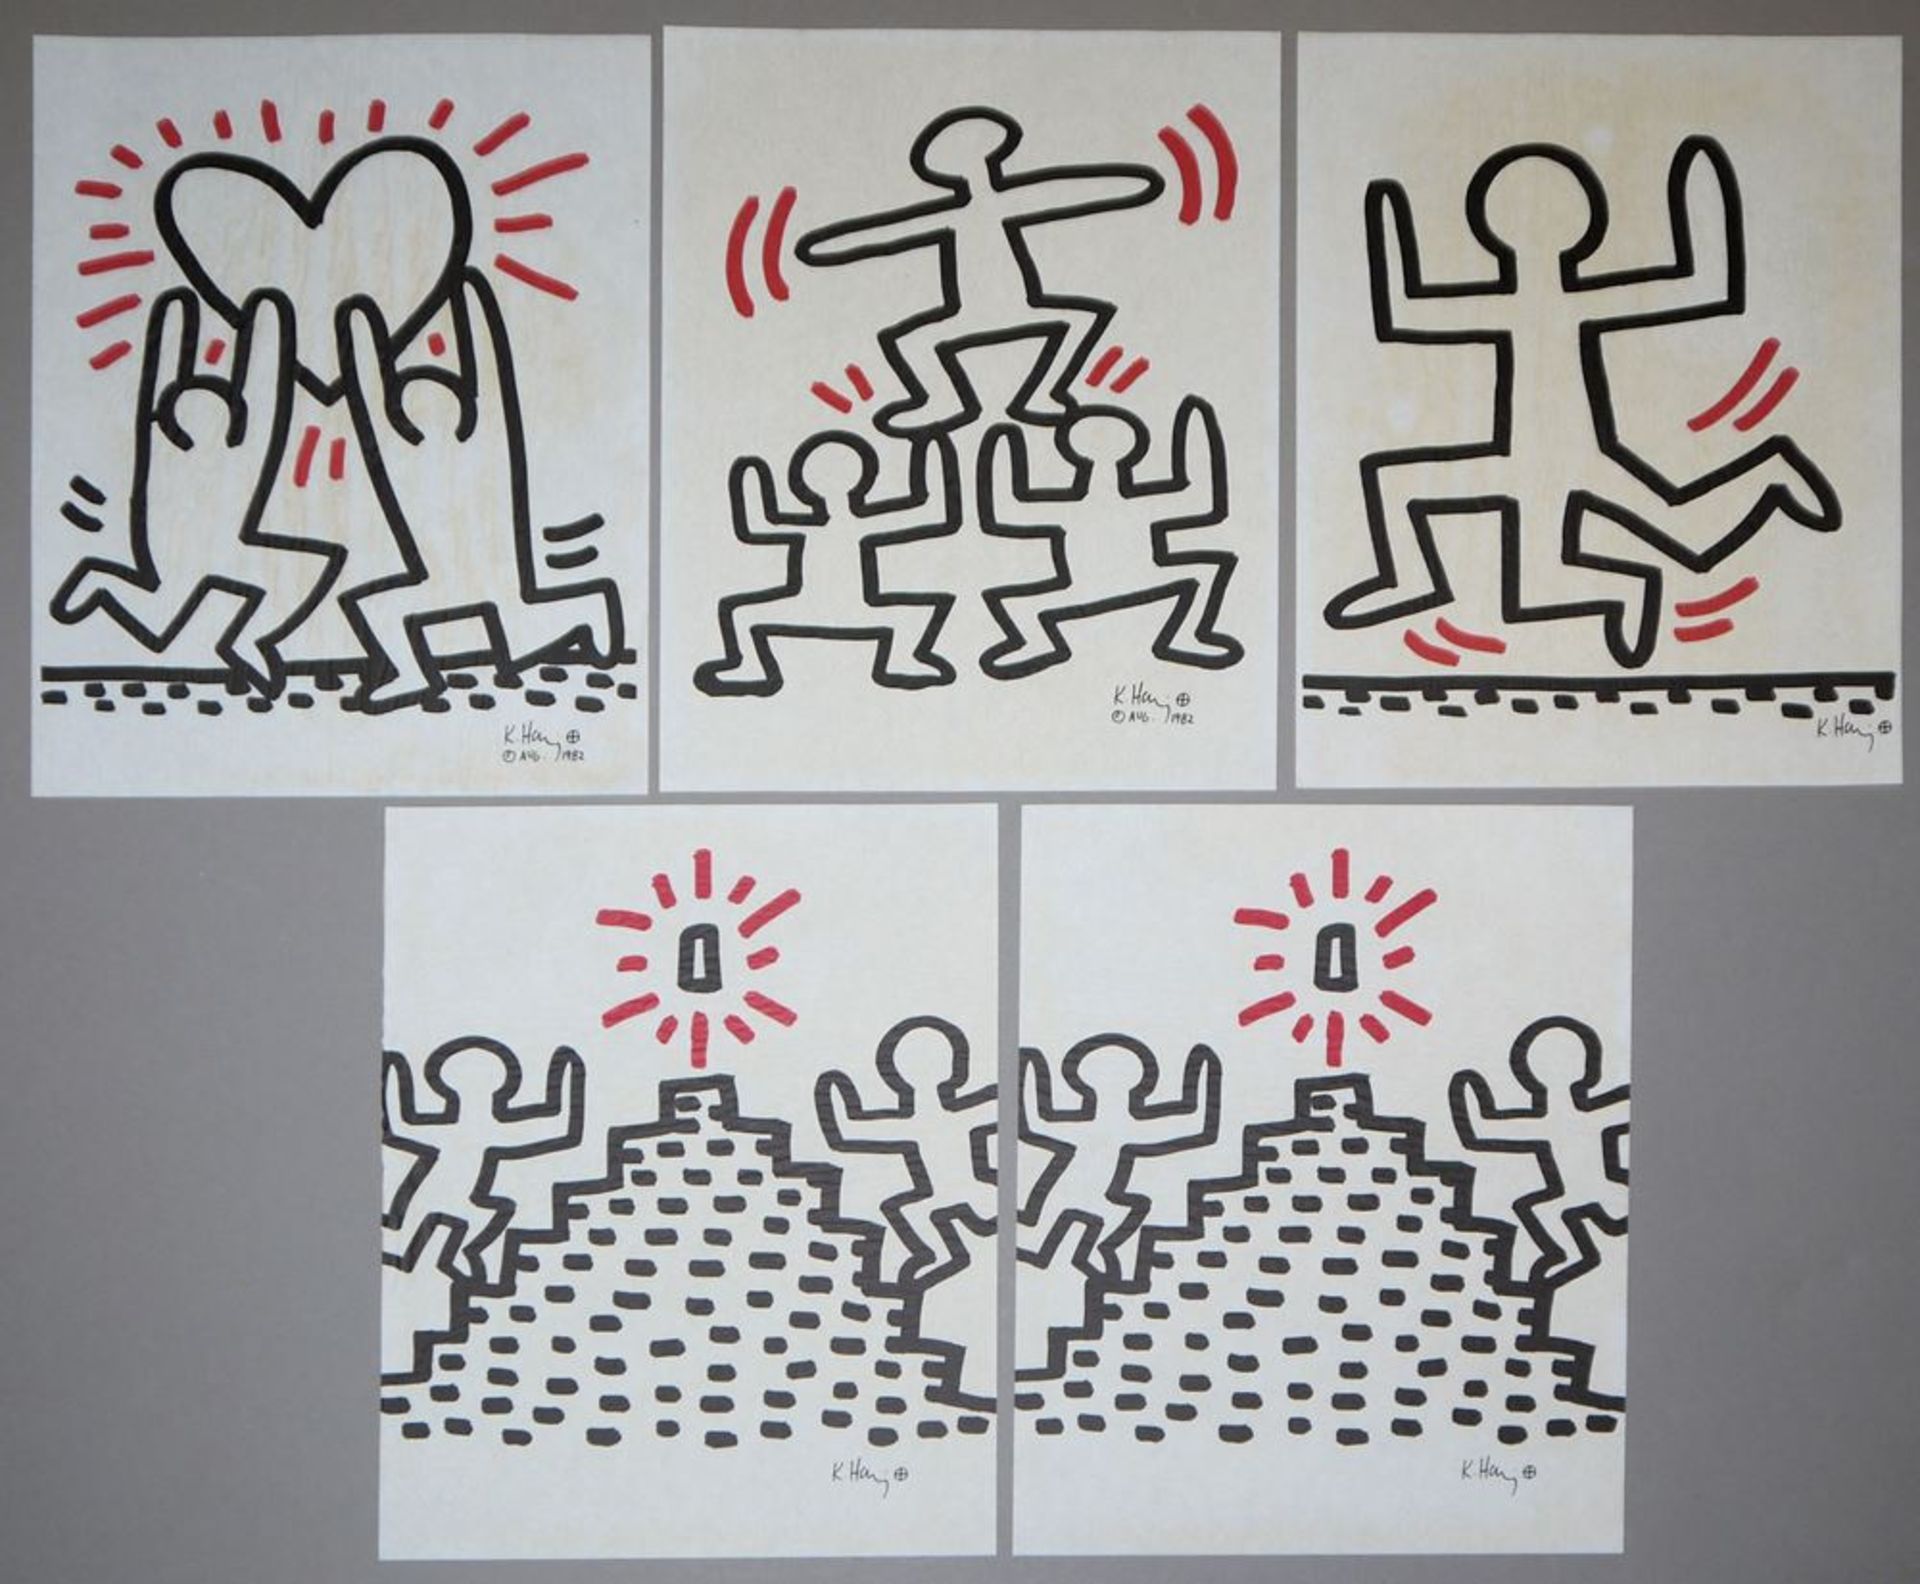 Keith Haring, 5 sheets from the "Bayer Suite", colouroff sets from 1982, each one of 70 ex.